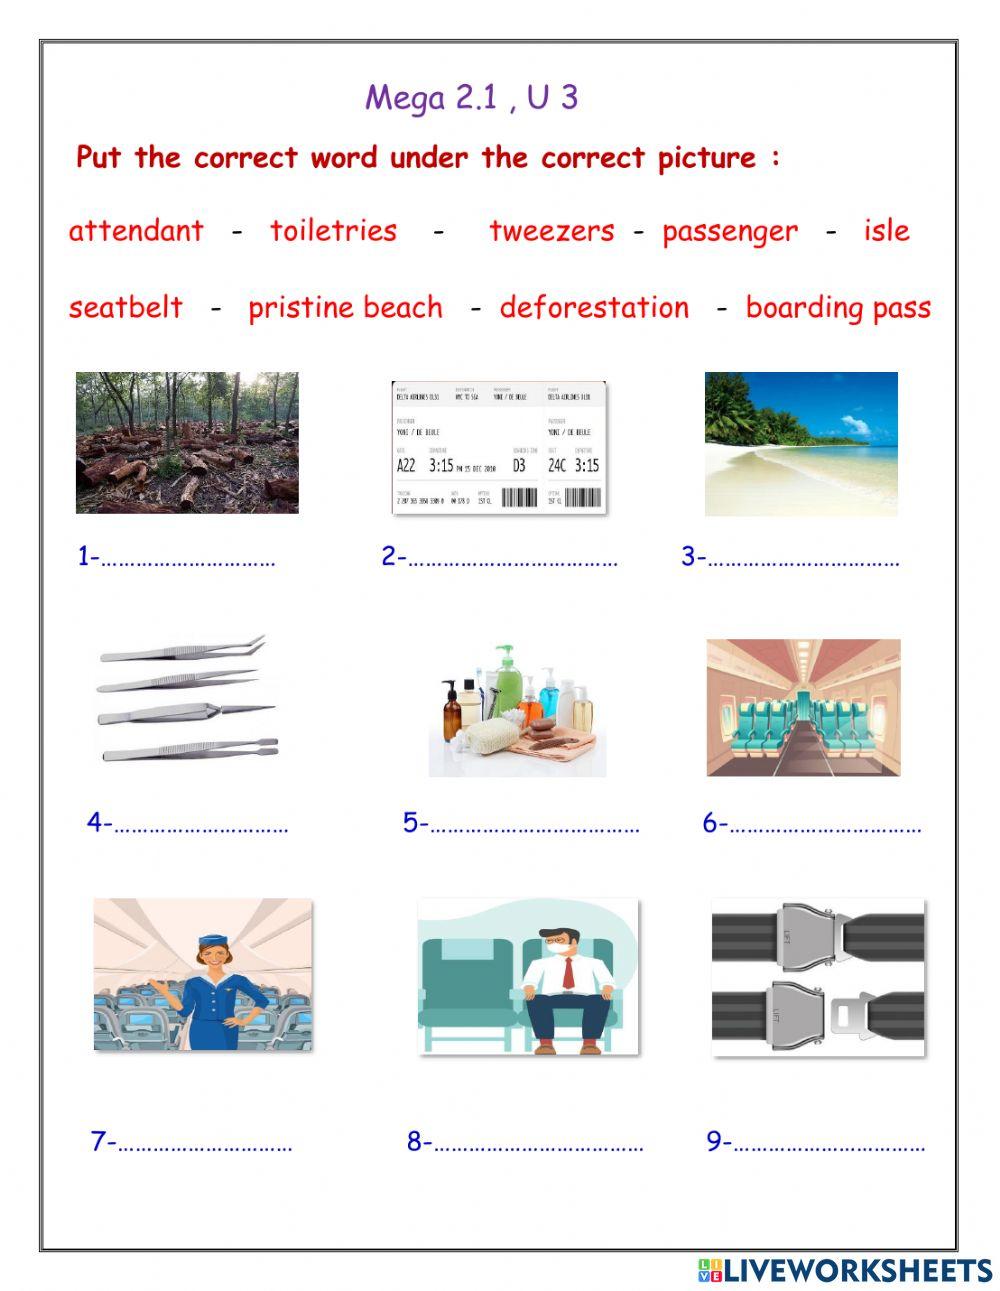 Mega2.1, U3 , Drag and drop the correct word under the suitable picture